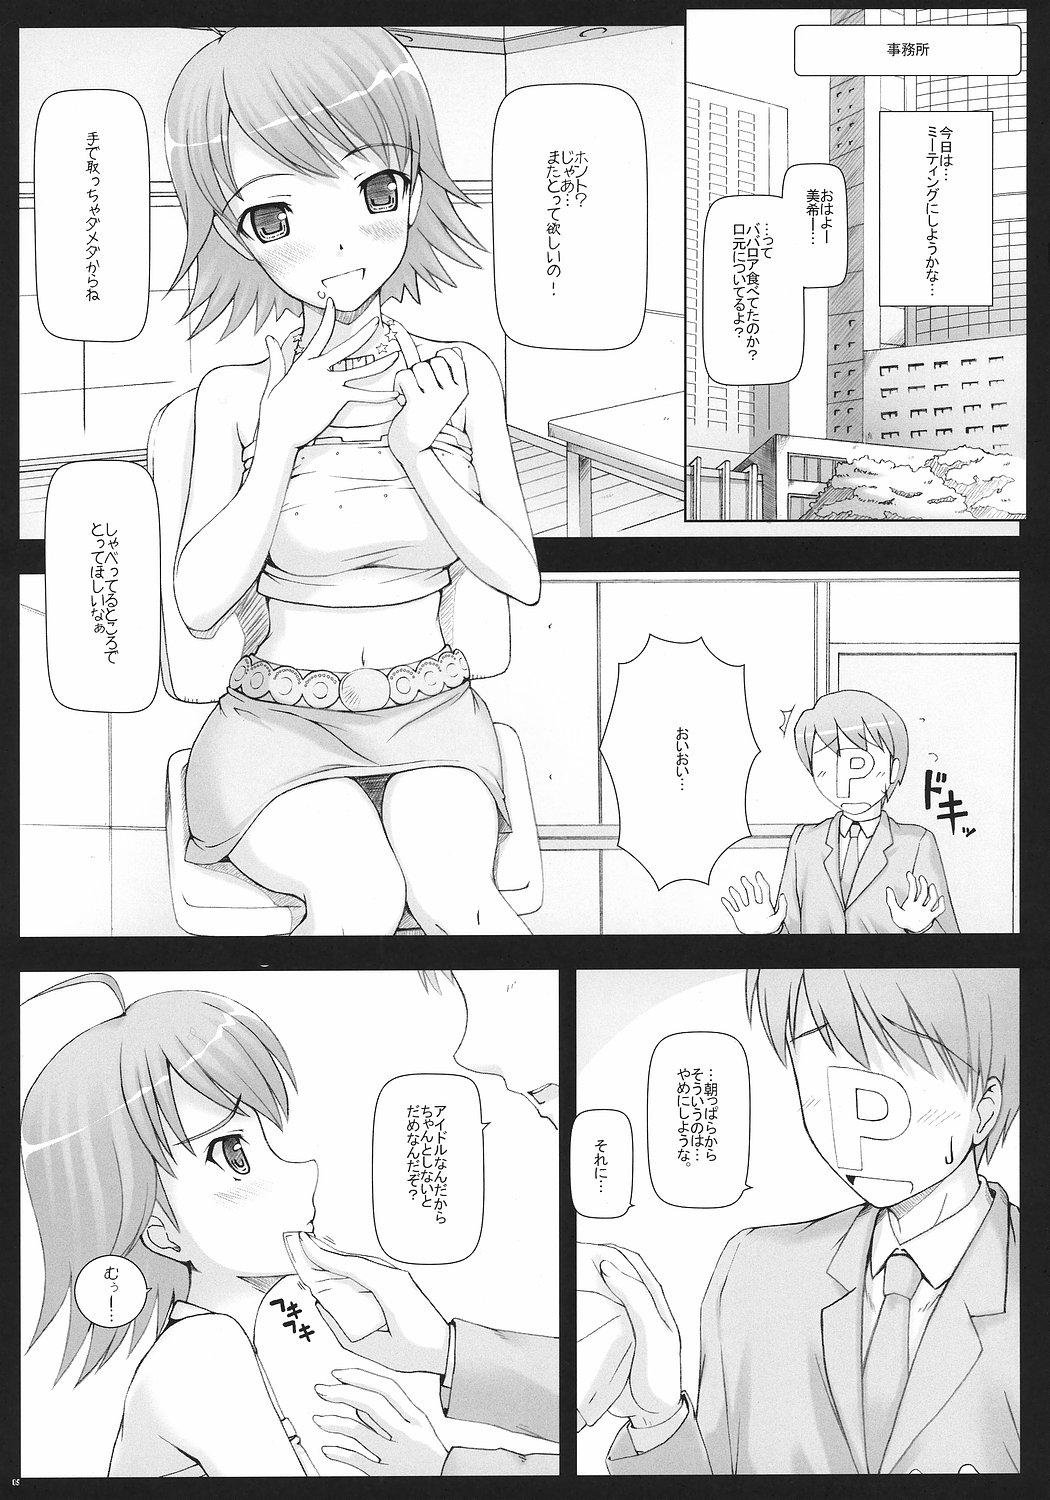 Stripper BAD COMMUNICATION? 2 - The idolmaster Female Domination - Page 4